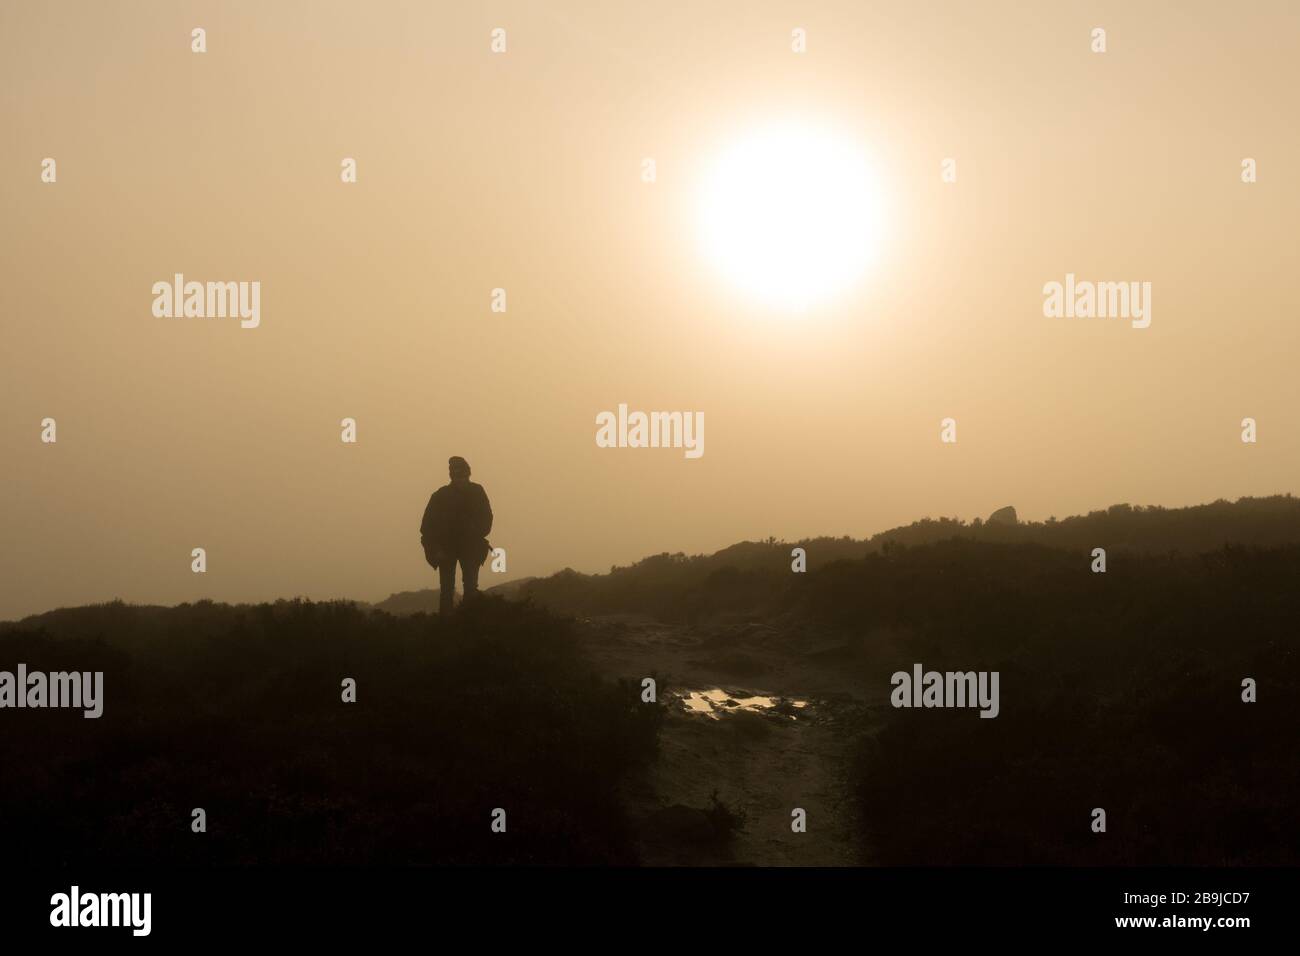 Atmospheric view of a person walking out of a foggy valley into the sunshine in a cloud inversion in the countryside, Ilkley Moor, West Yorkshire, UK Stock Photo